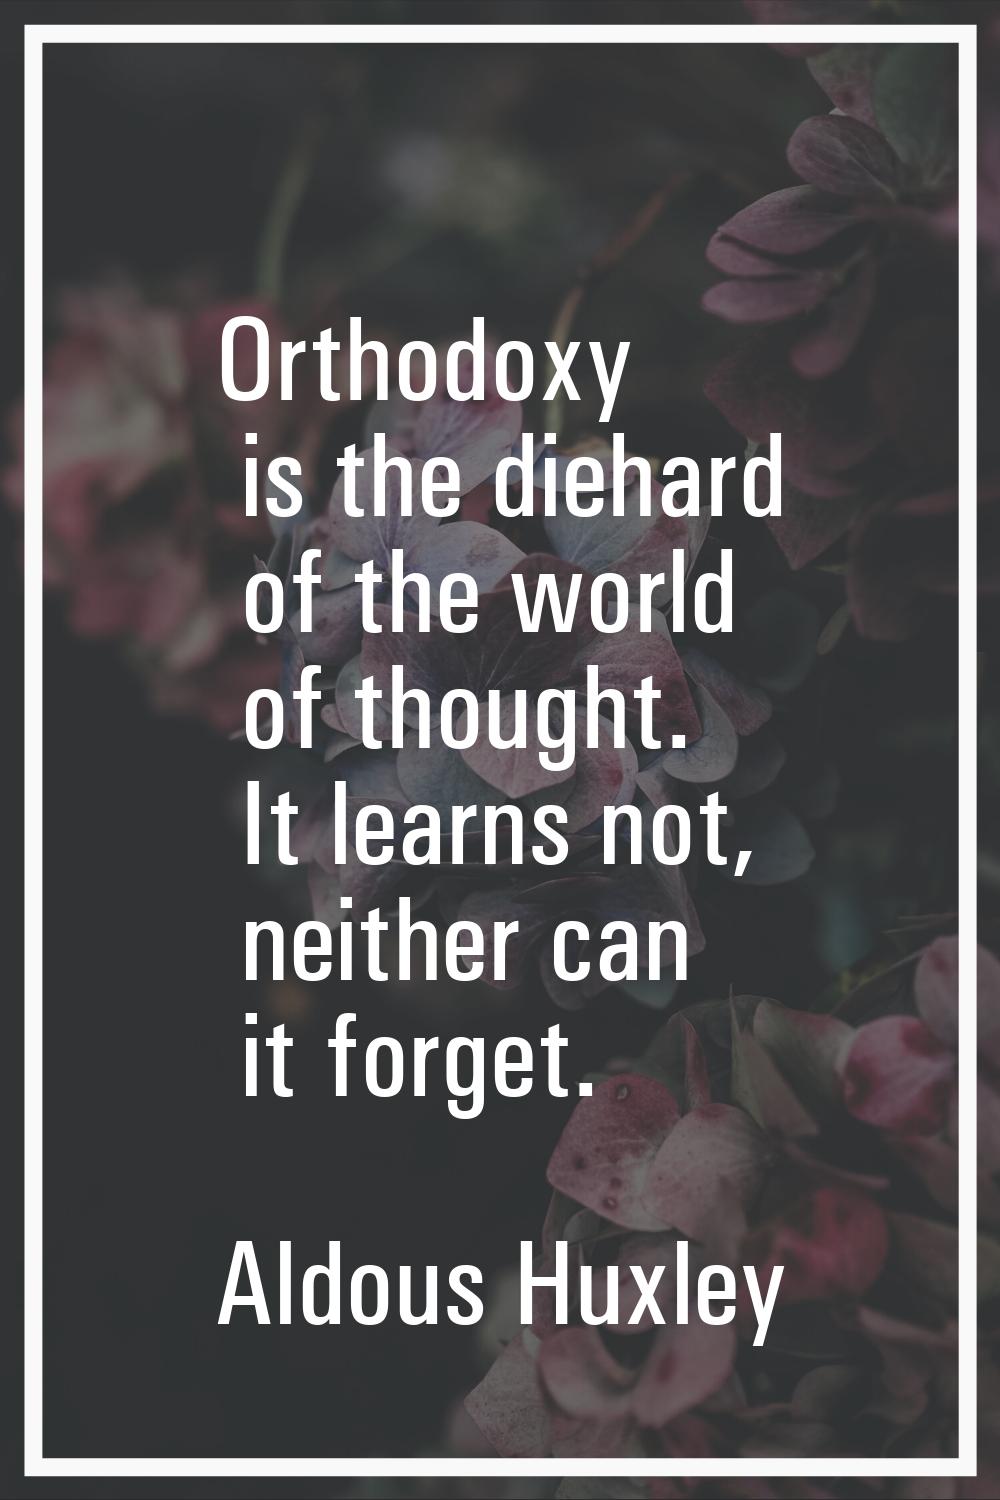 Orthodoxy is the diehard of the world of thought. It learns not, neither can it forget.